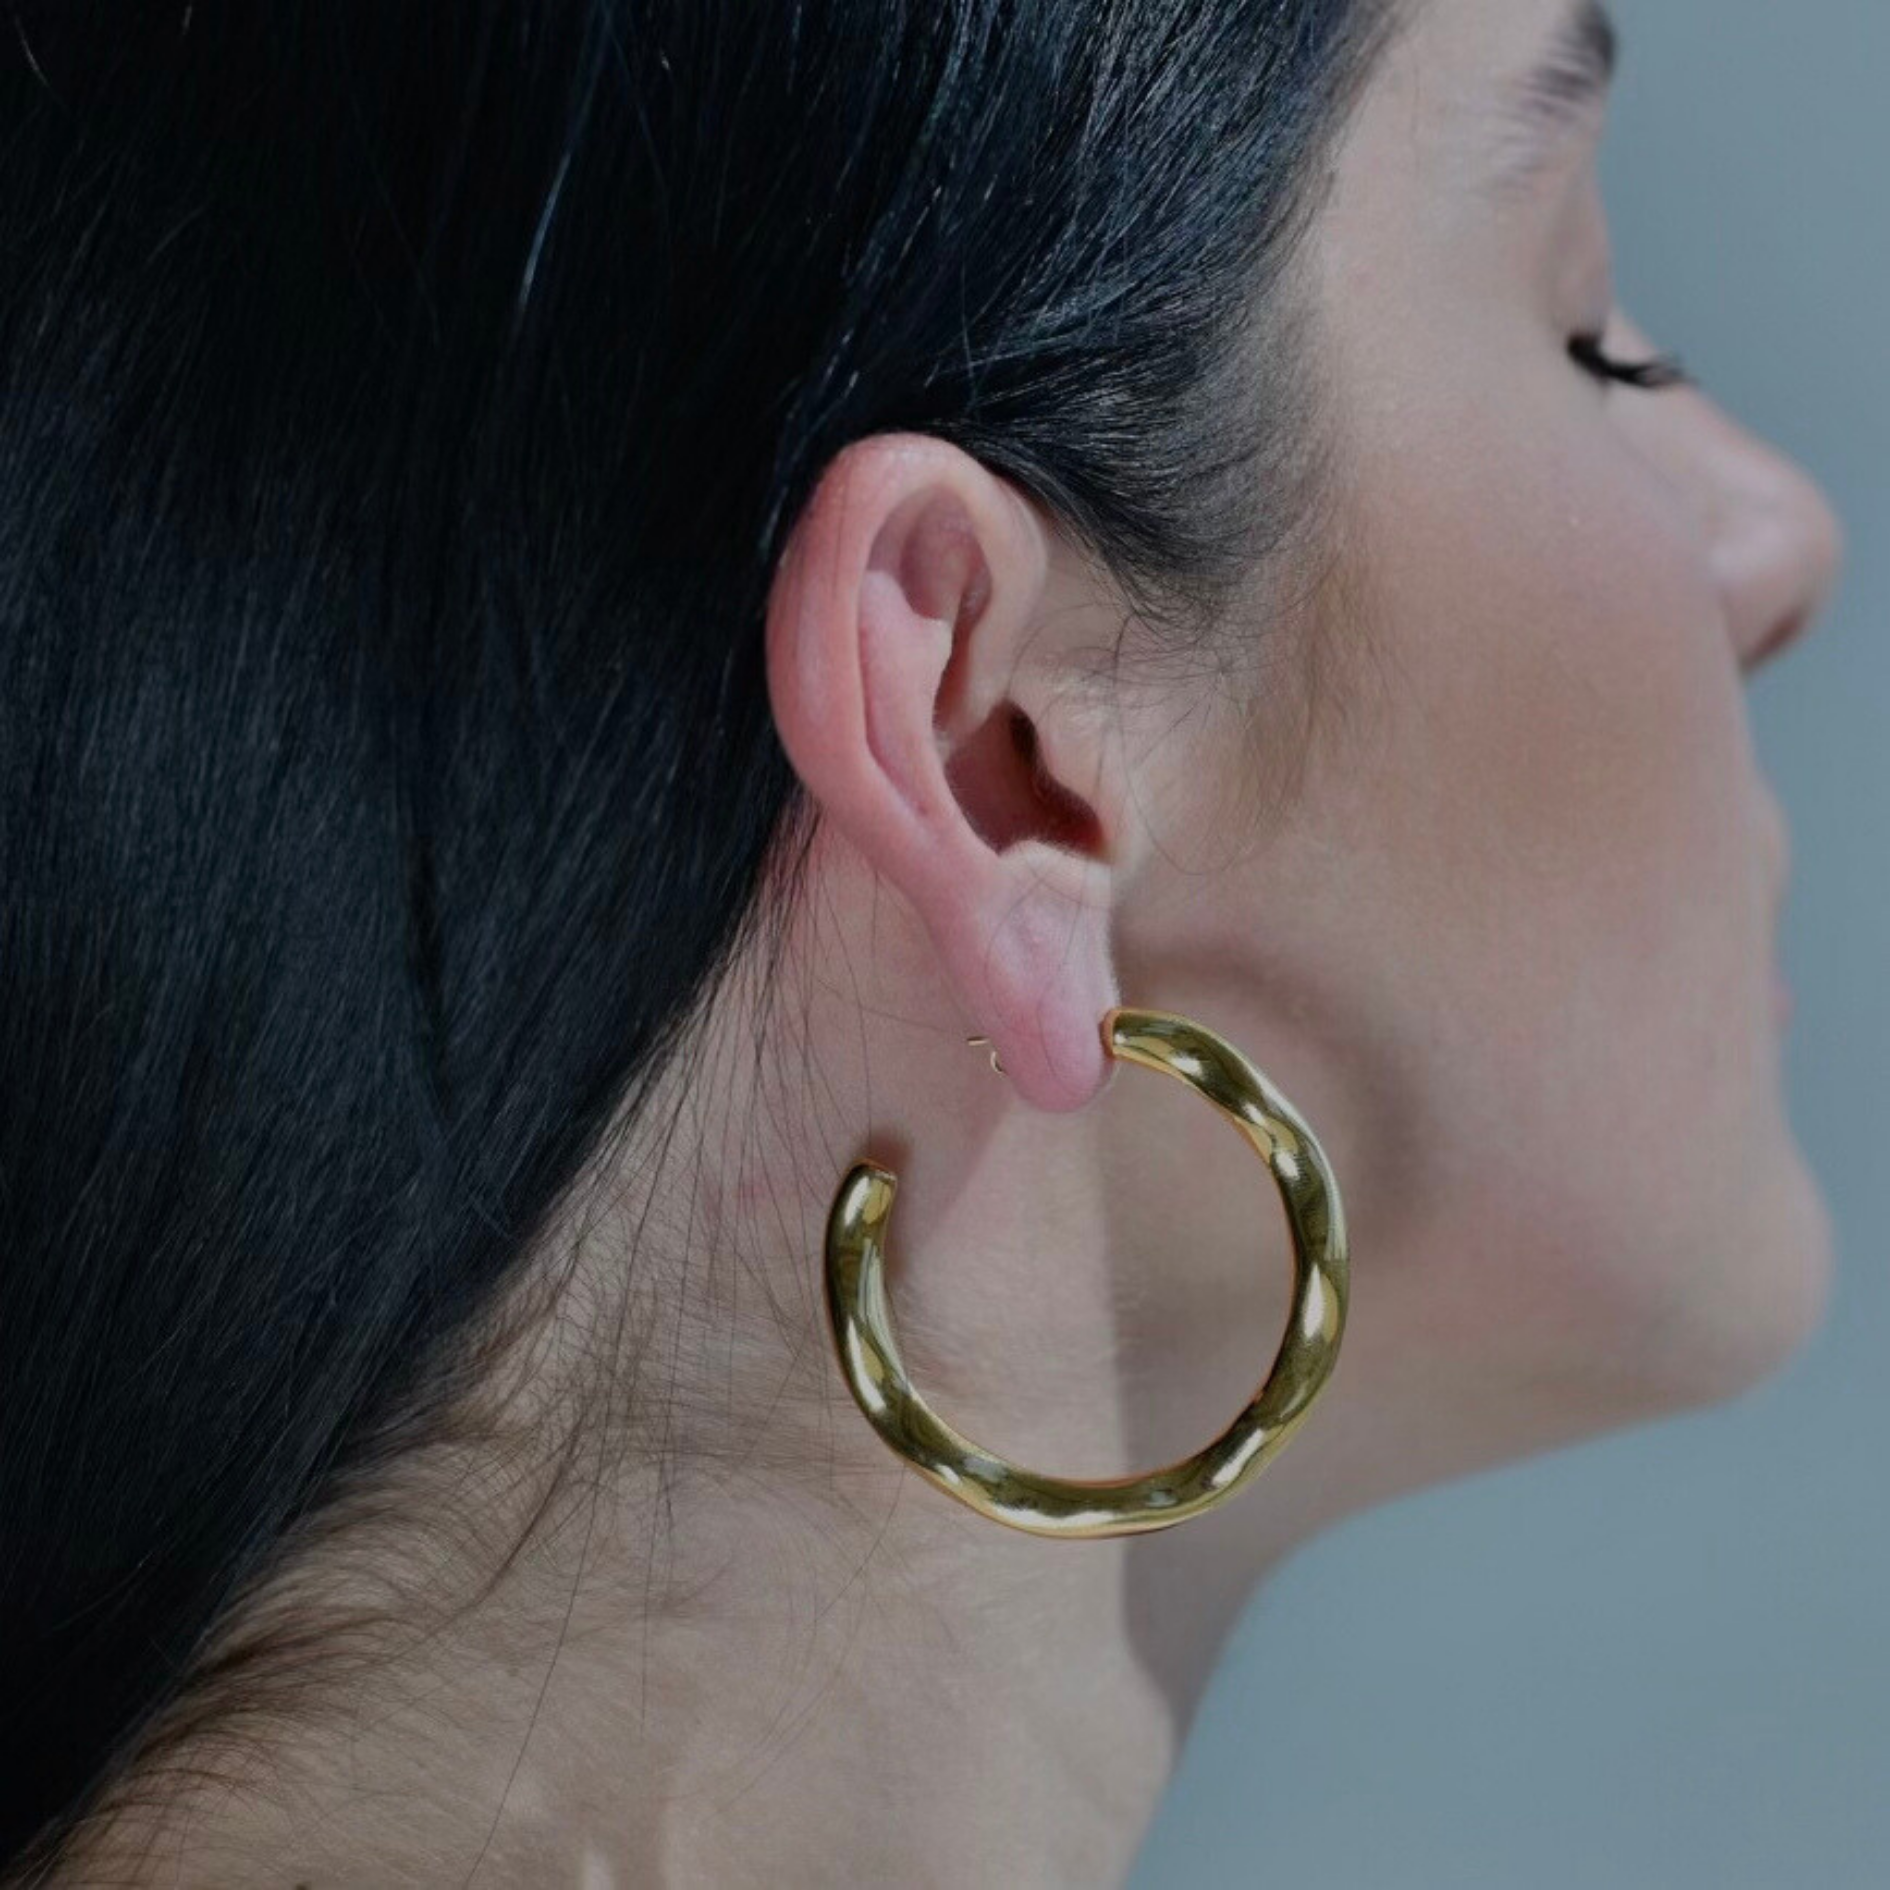 woman wearing Gold hoop earrings with irregular surface. Big size of gold round earrings. Irregular surface.